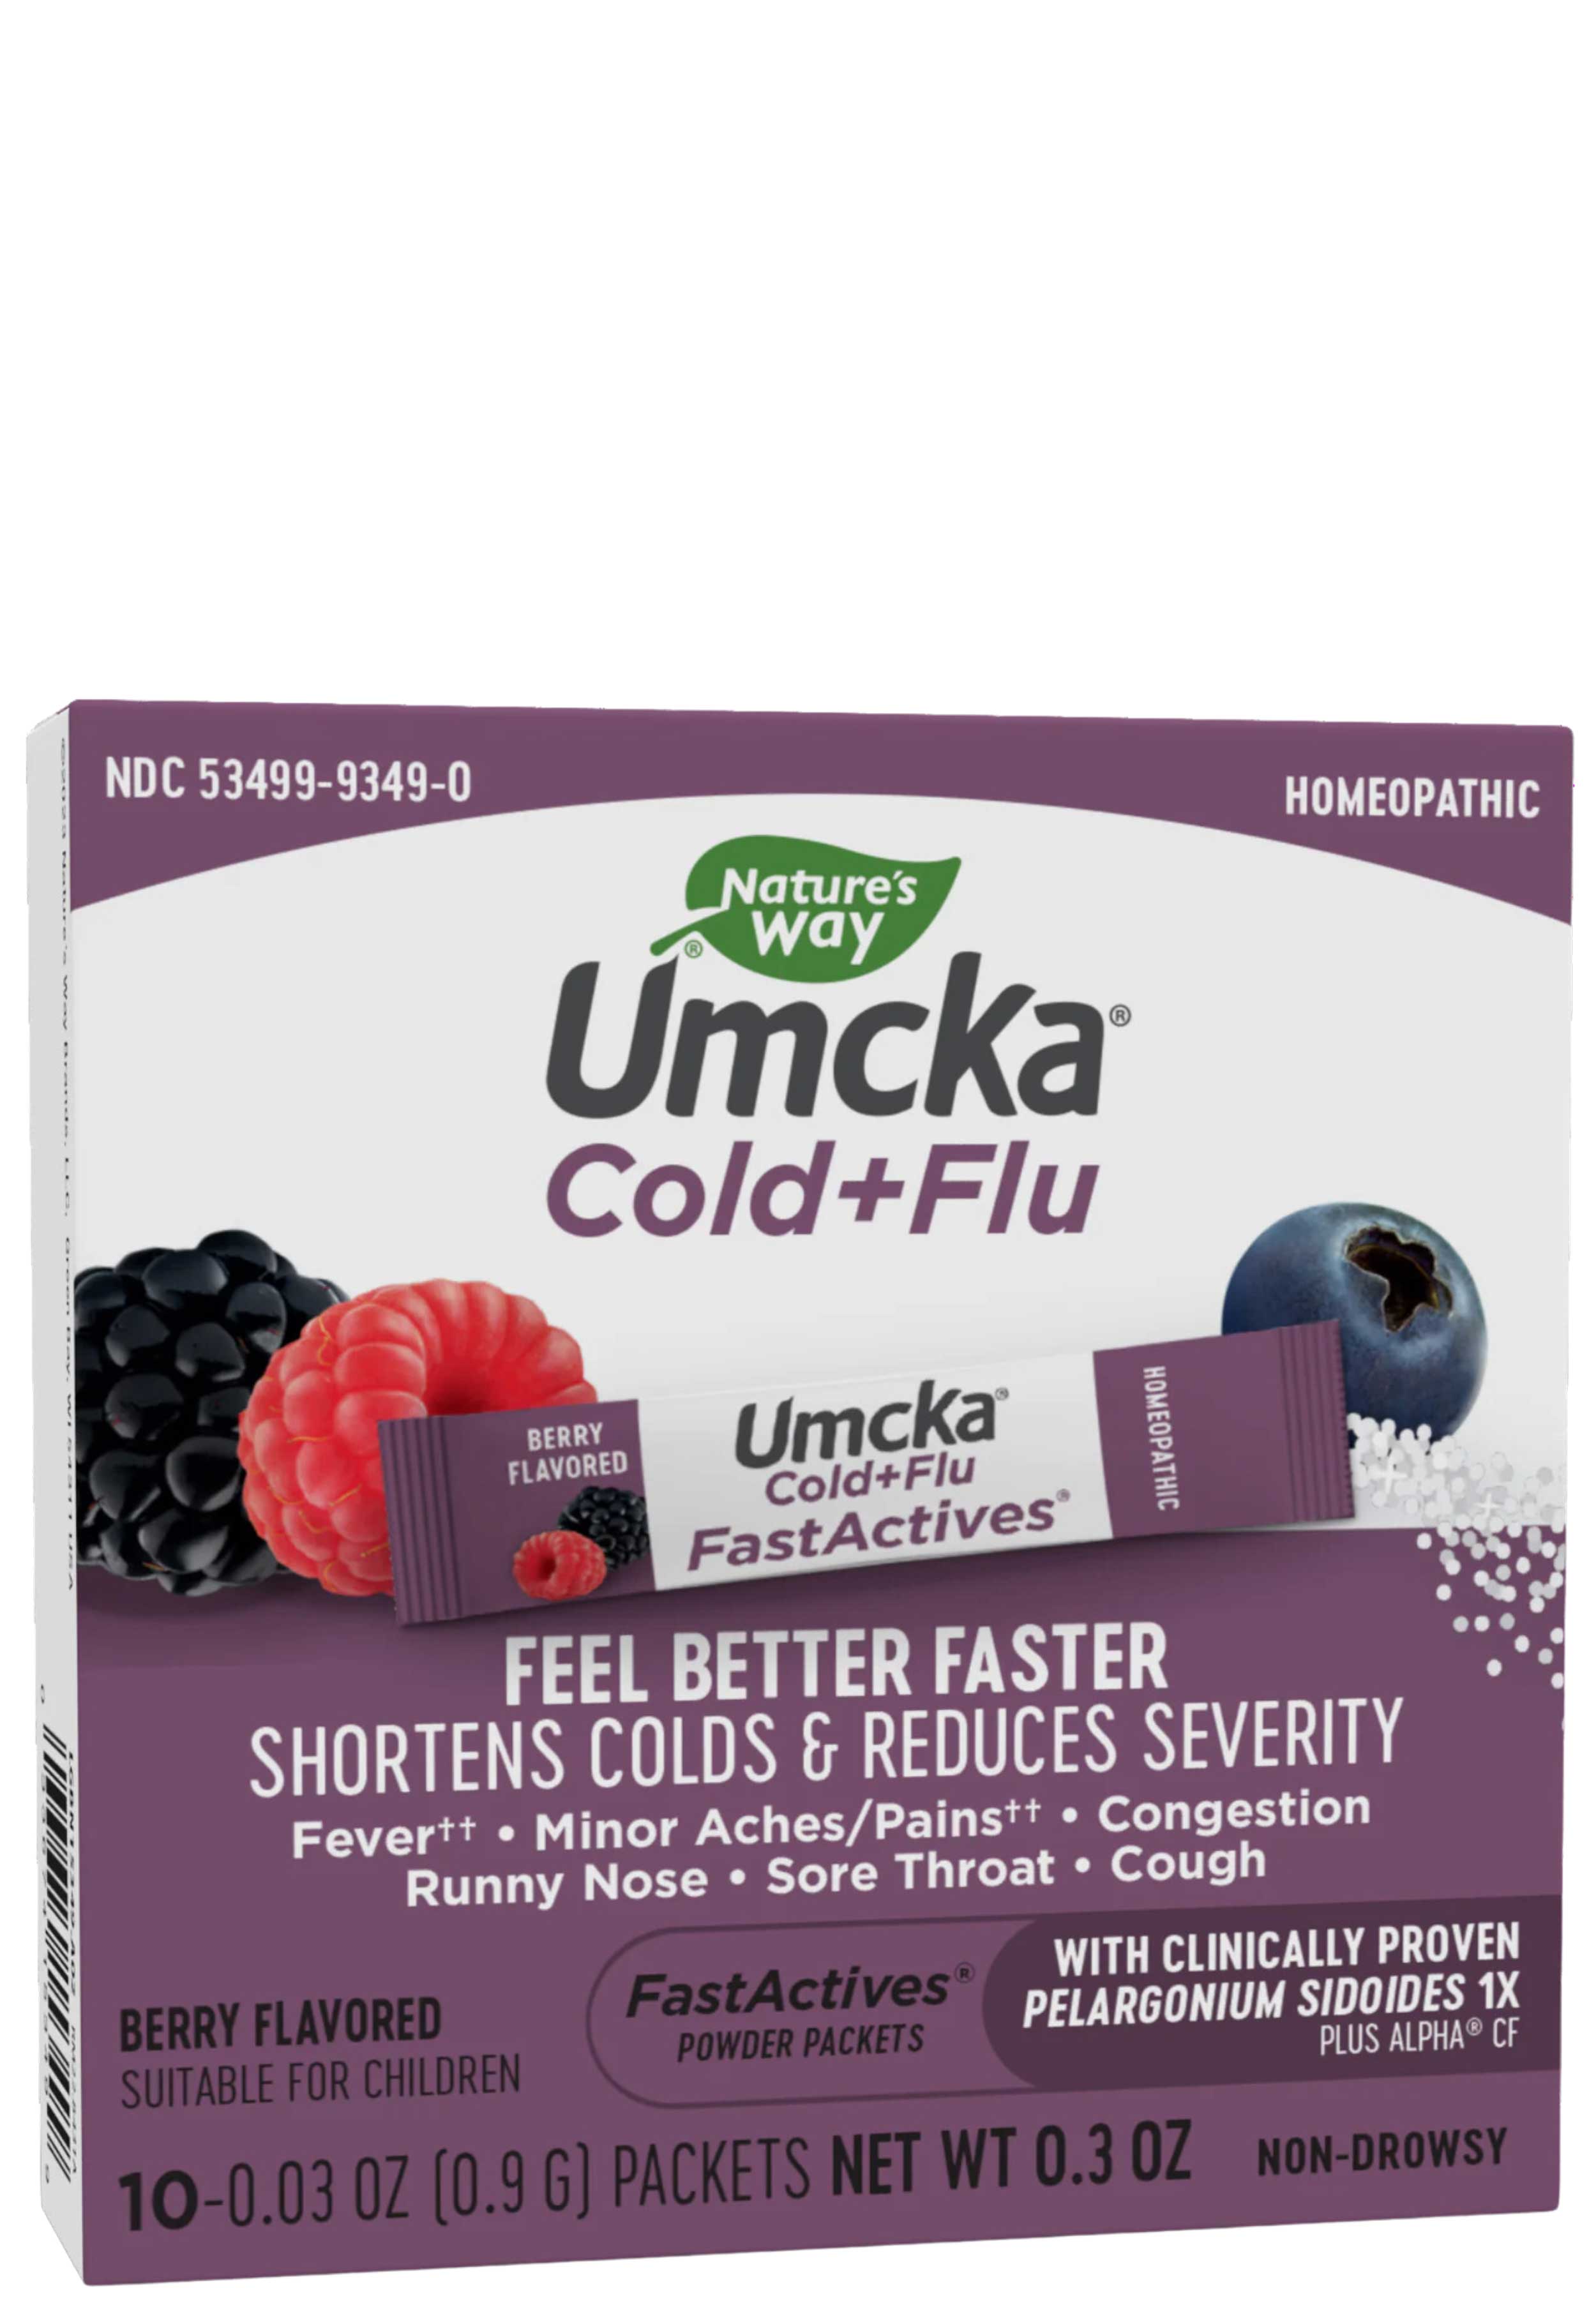 Nature's Way Umcka Cold+Flu FastActives (Berry)